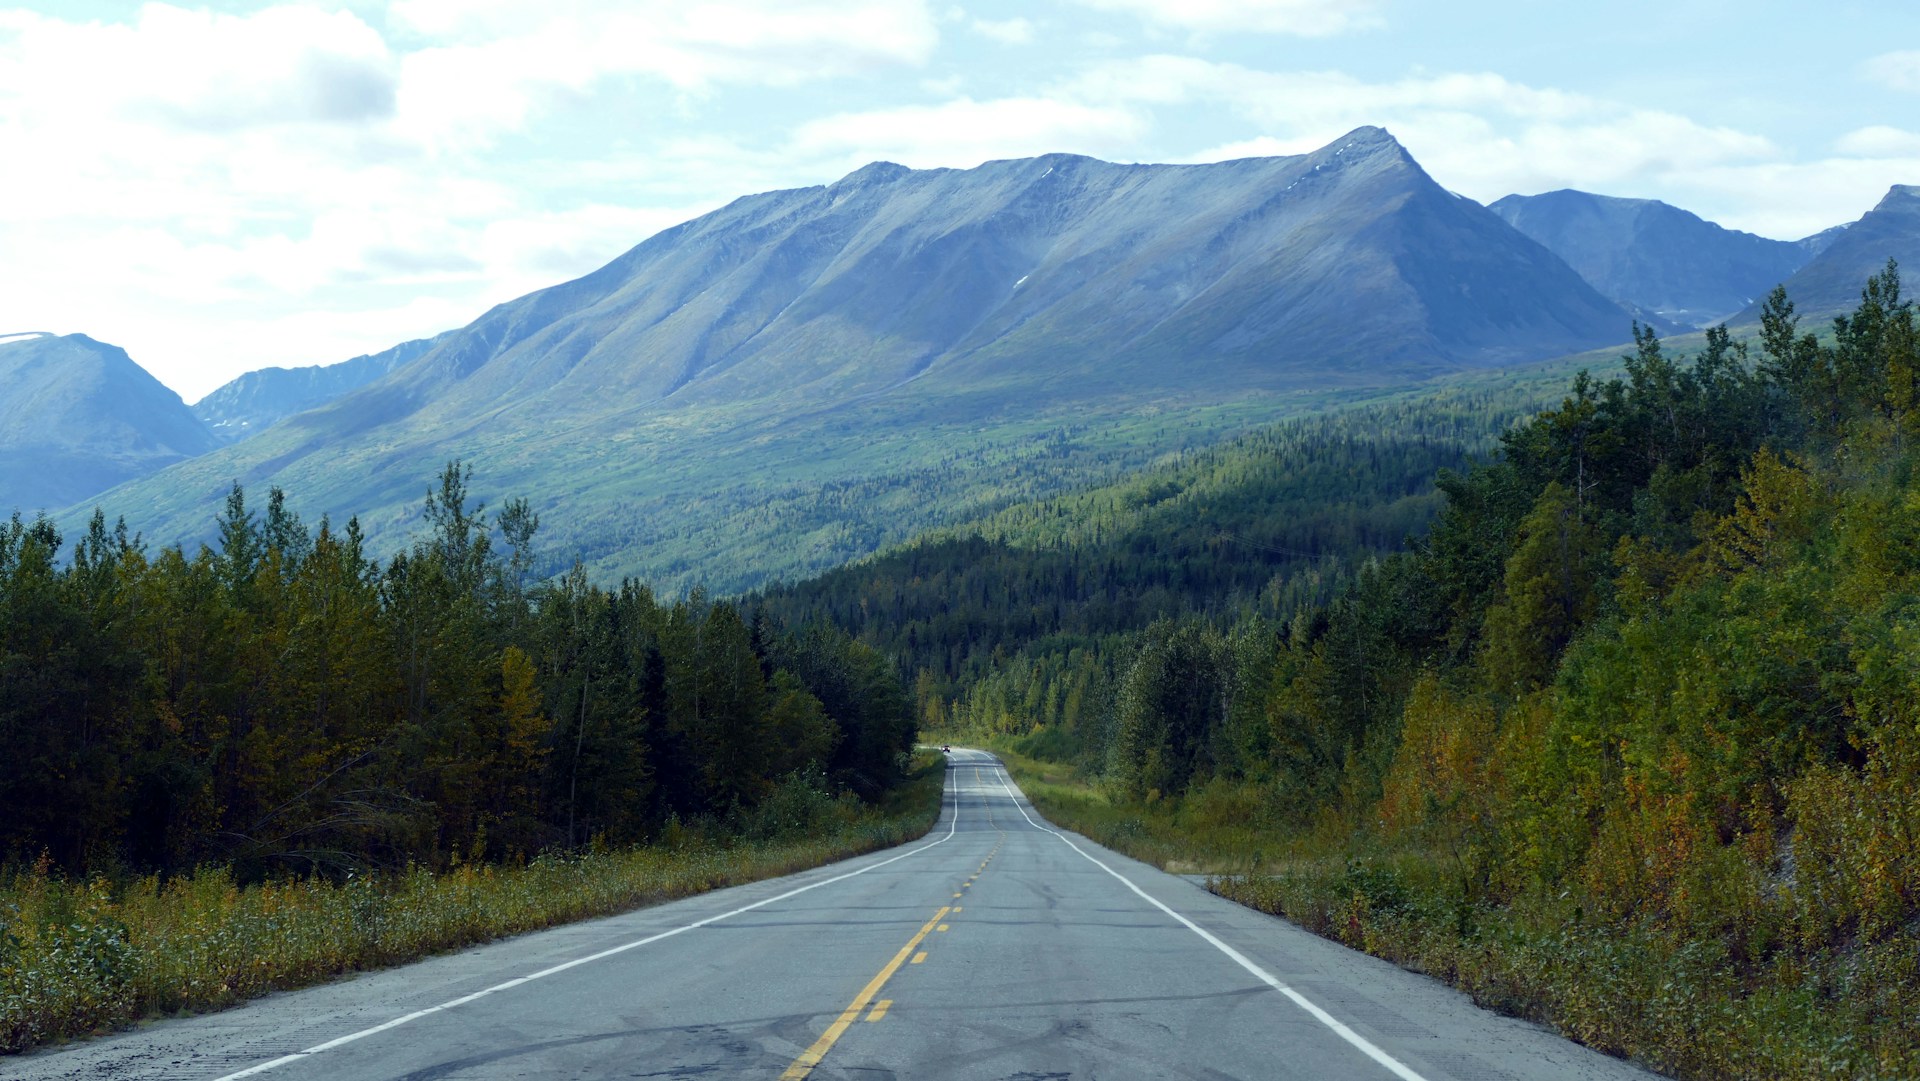 <p><strong><em>364 miles; 2-4 days duration</em></strong></p>  <p>You can't talk about road trips without mentioning Alaska's Richardson Highway. This beautiful road trip goes from Fairbanks to Valdez, through the remote Alaskan wilderness.</p>  <p>The road is over 366 miles long and has rolling mountains, glaciers of ice falling through the terrace trees, and fog. With the stunning scenery, you will also have the chance to get out and take a hike, have a few lunches, and go for white-water rafting. </p>  <p>You cannot leave the Richardson Highway without stopping at the <a href="https://www.valdezalaska.org/discover/glaciers/worthington-glacier/" rel="noreferrer noopener">Worthington Glacier</a> and the Keystone Canyon. All of the waterfalls are quite spectacular, and the snow and vegetation are unbelievable. Furthermore, it is rare and beautiful to encounter towns with outstanding hospitality and good vibes. </p>  <p><strong>Check Out: <a href="https://www.familyproof.com/list/road-trip-how-to-beat-boredom-in-six-fun-ways/" rel="noreferrer noopener">Road Trip: How to Beat Boredom in Six Fun Ways</a></strong></p>